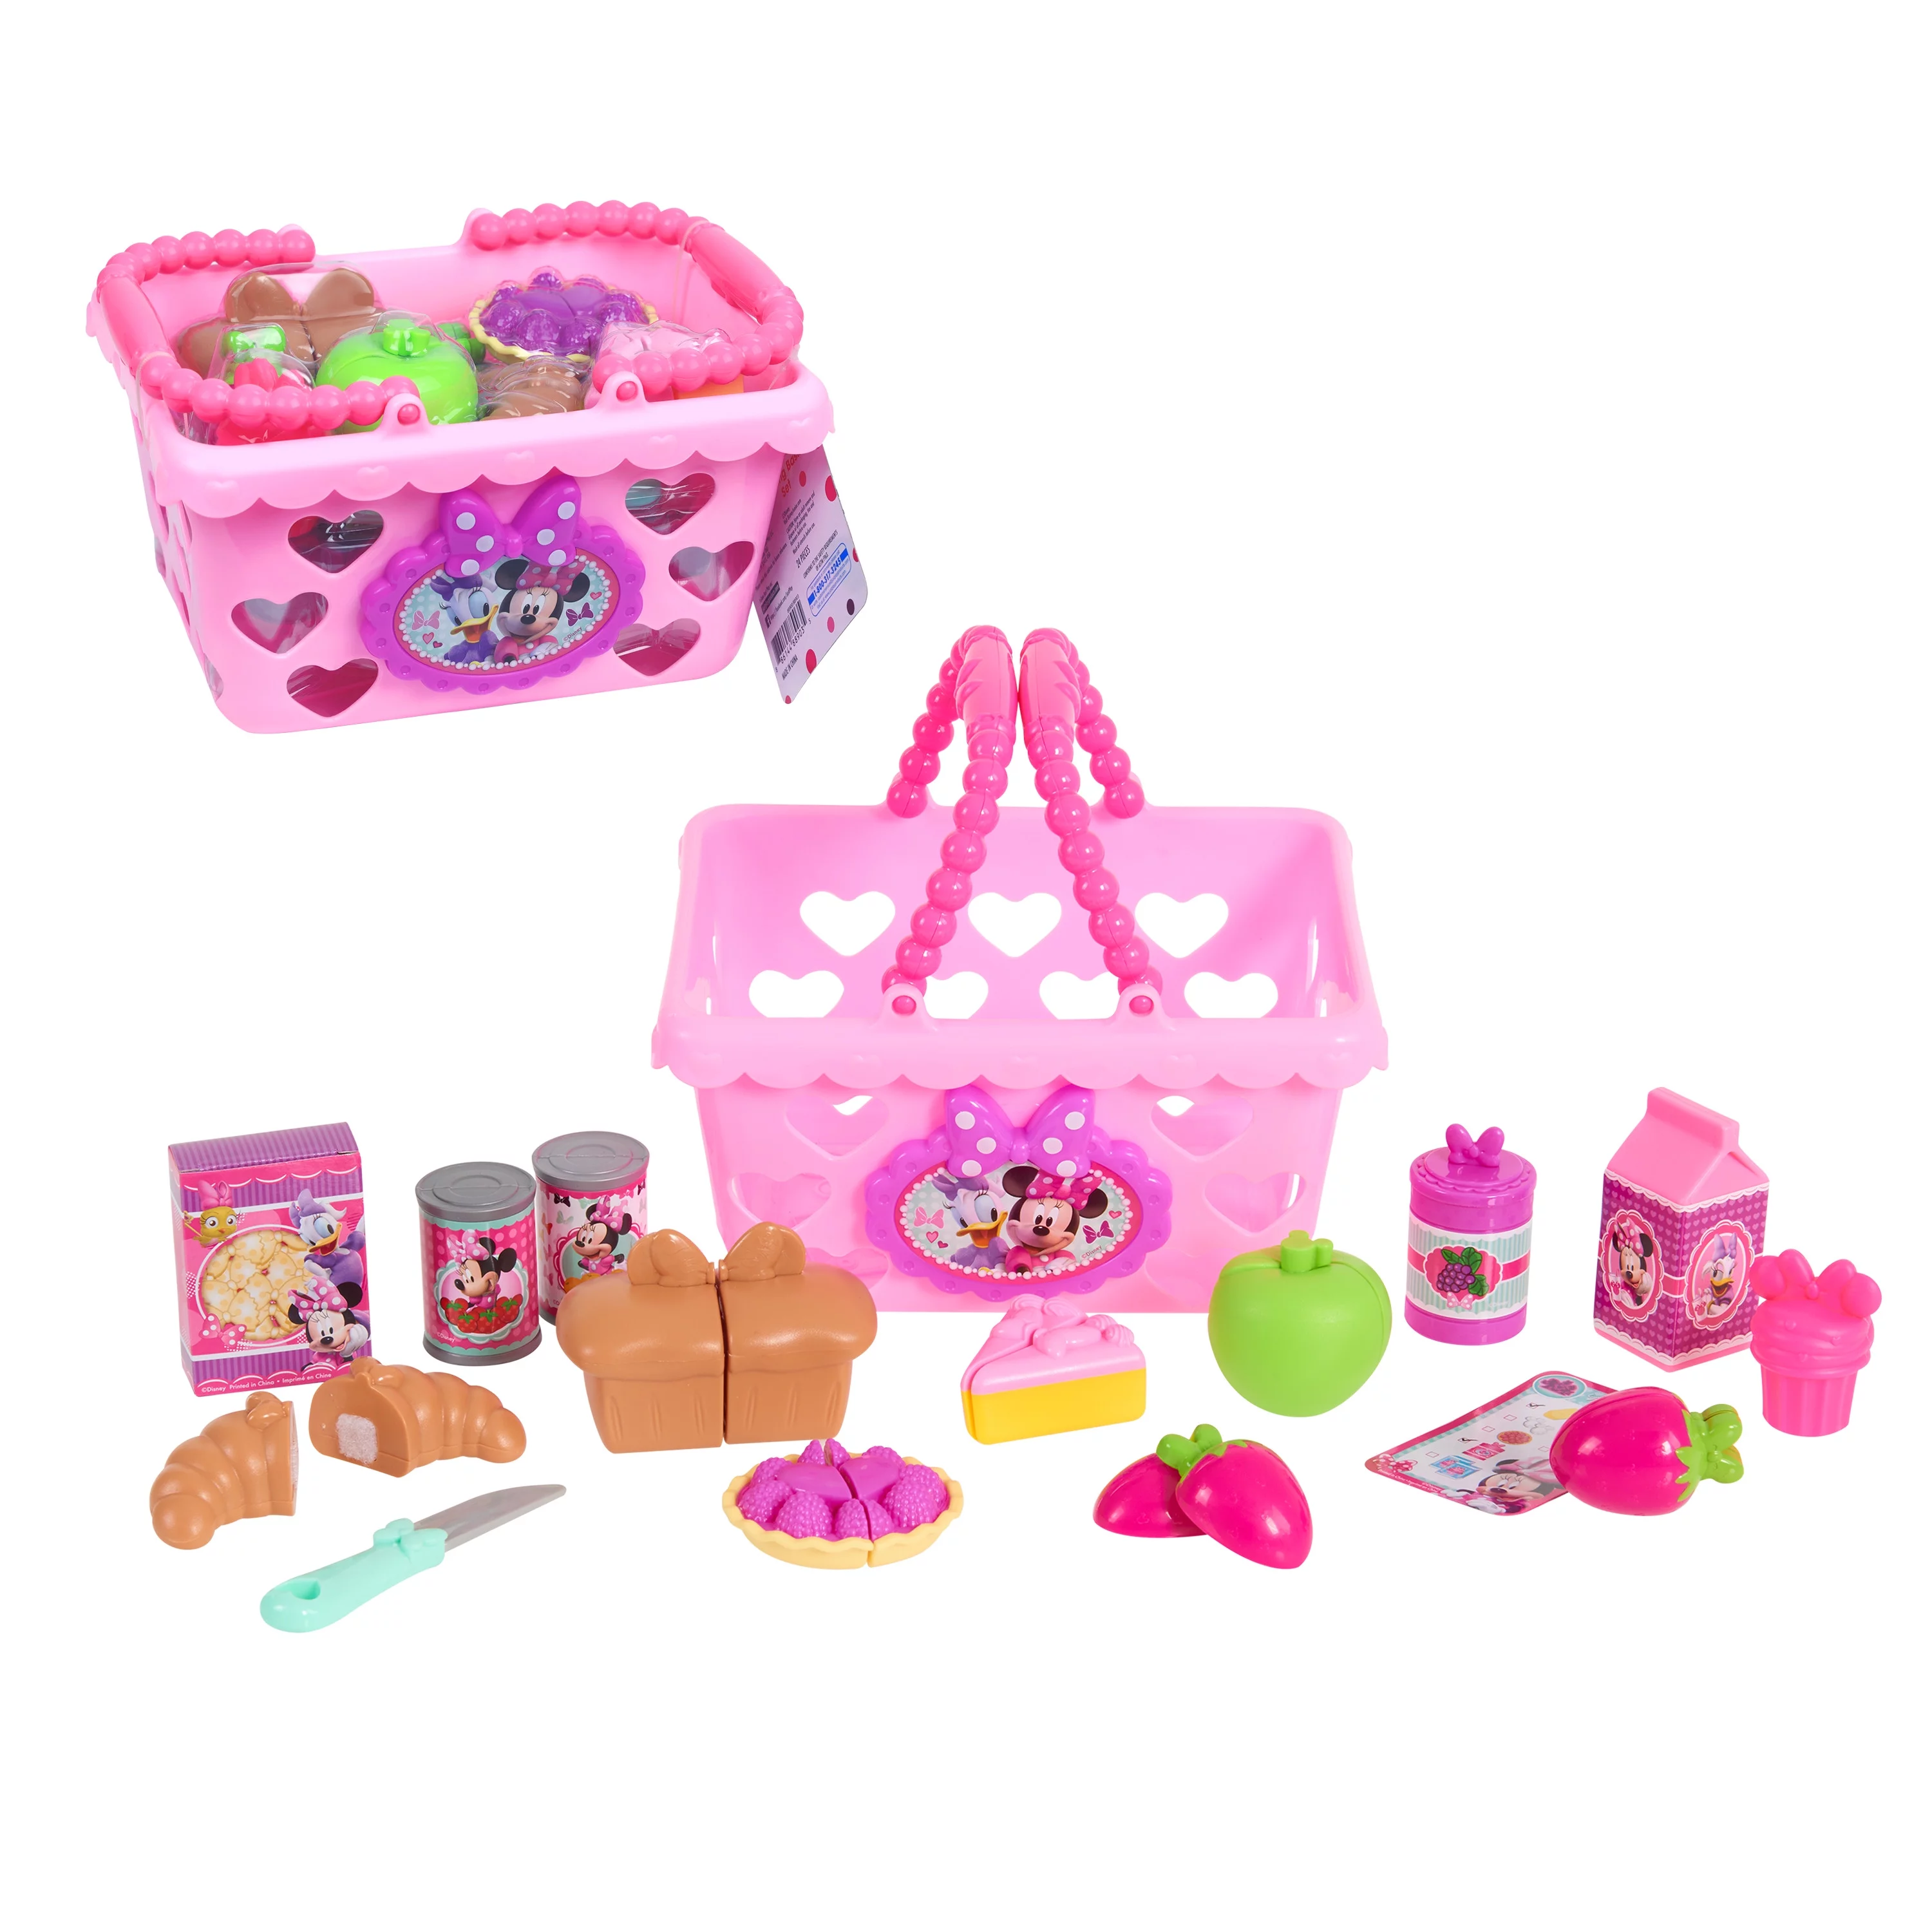 Minnie Bow-Tique Bowtastic Shopping Basket Set, Kids Toys for Ages 3 Up, Gifts and Presents